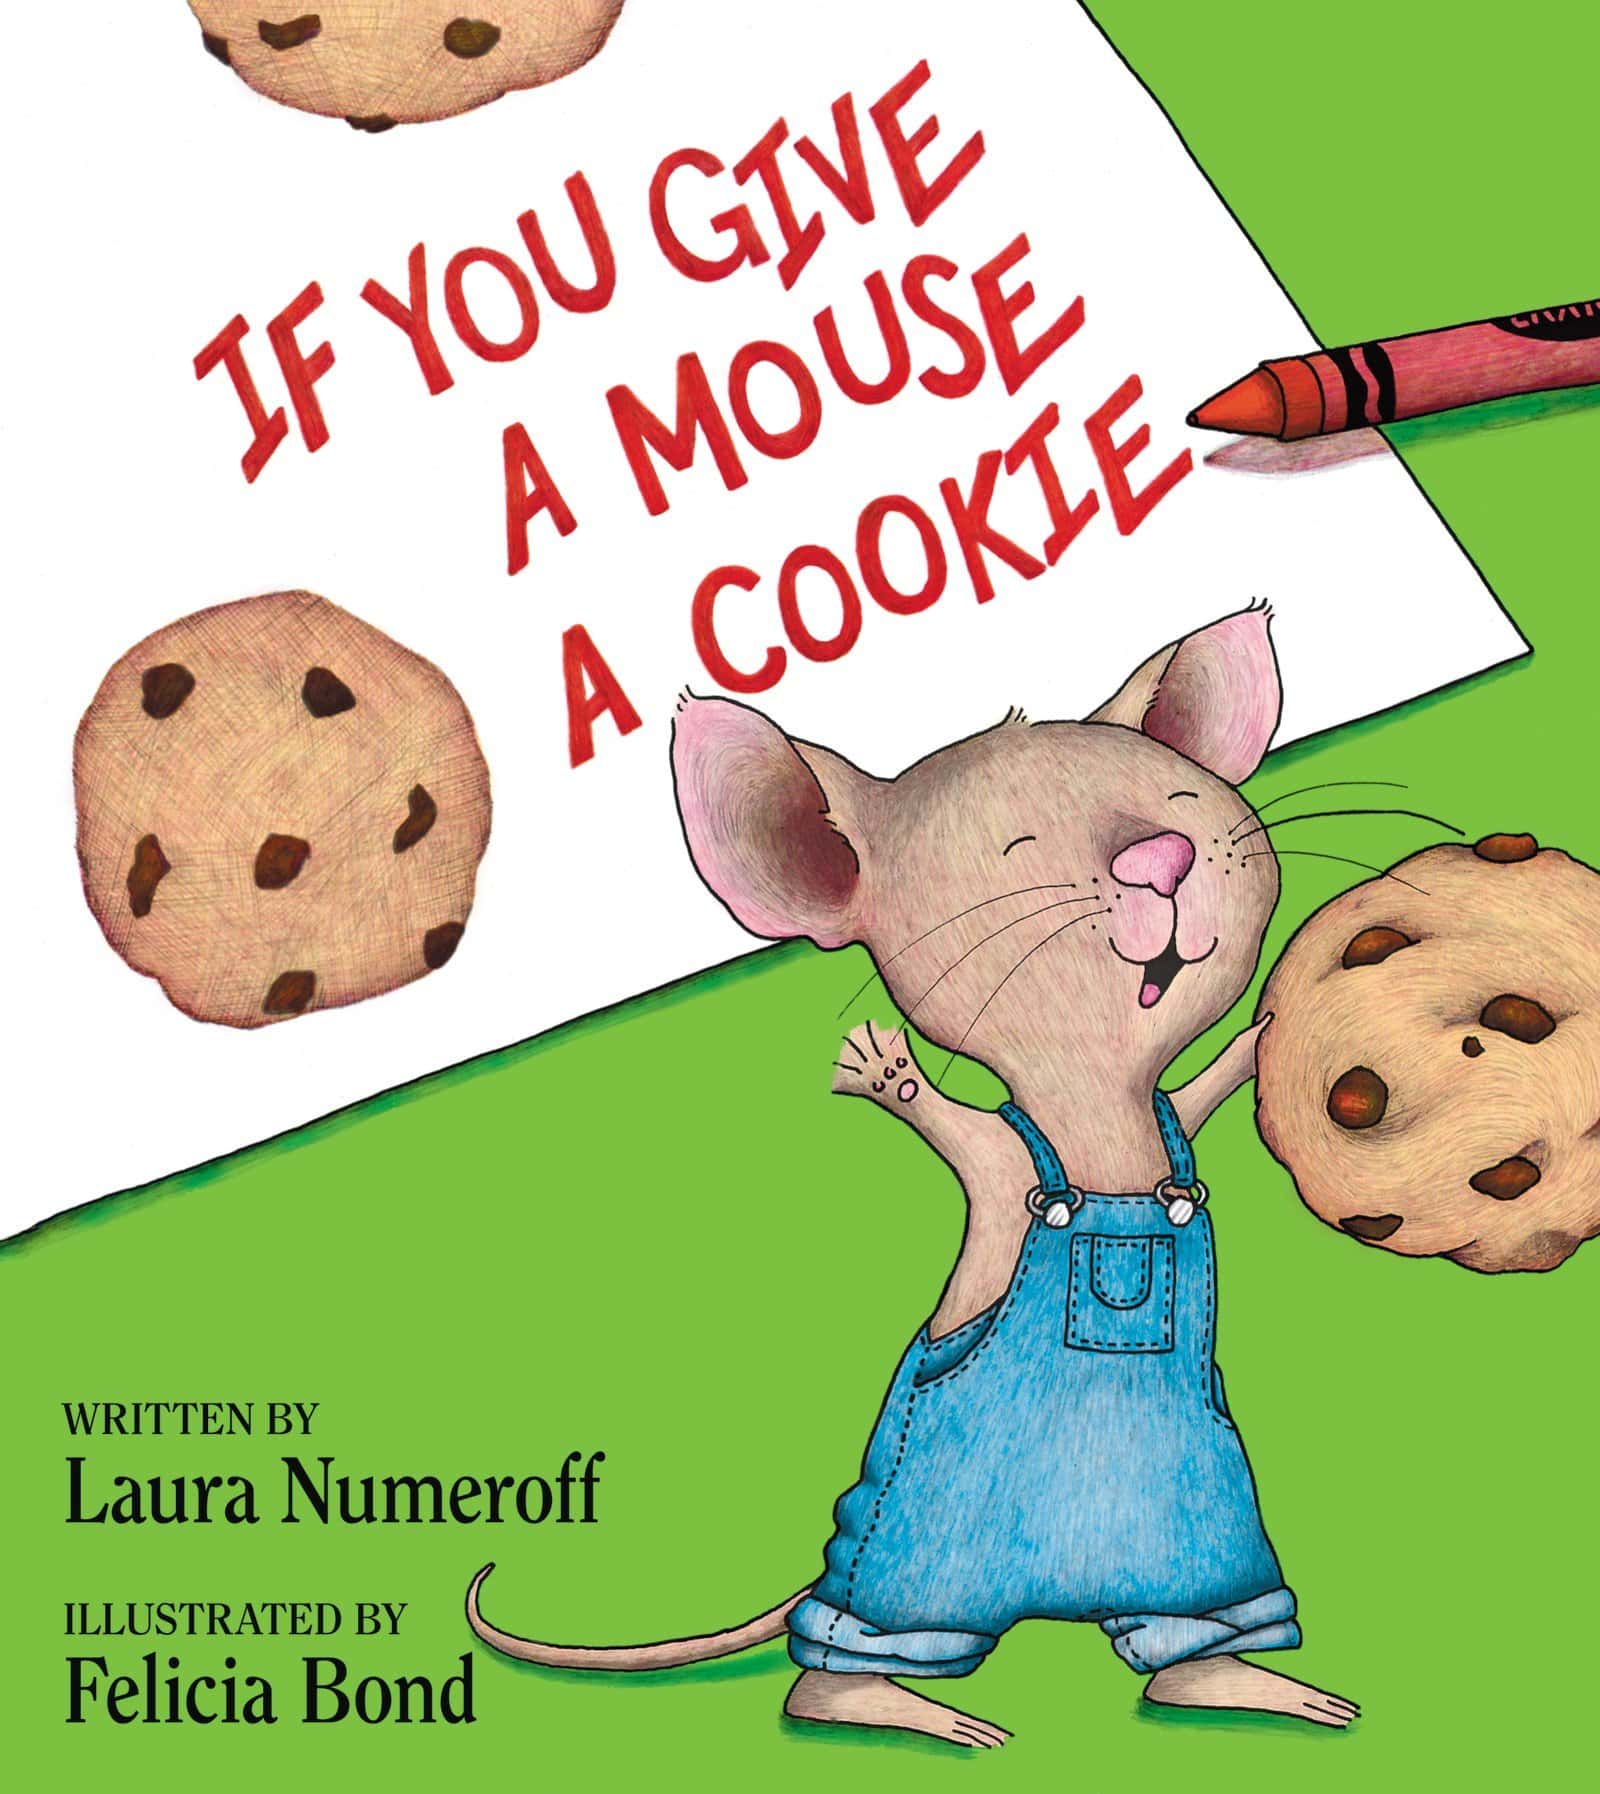 "If You Give a Mouse a Cookie" by Laura Numeroff